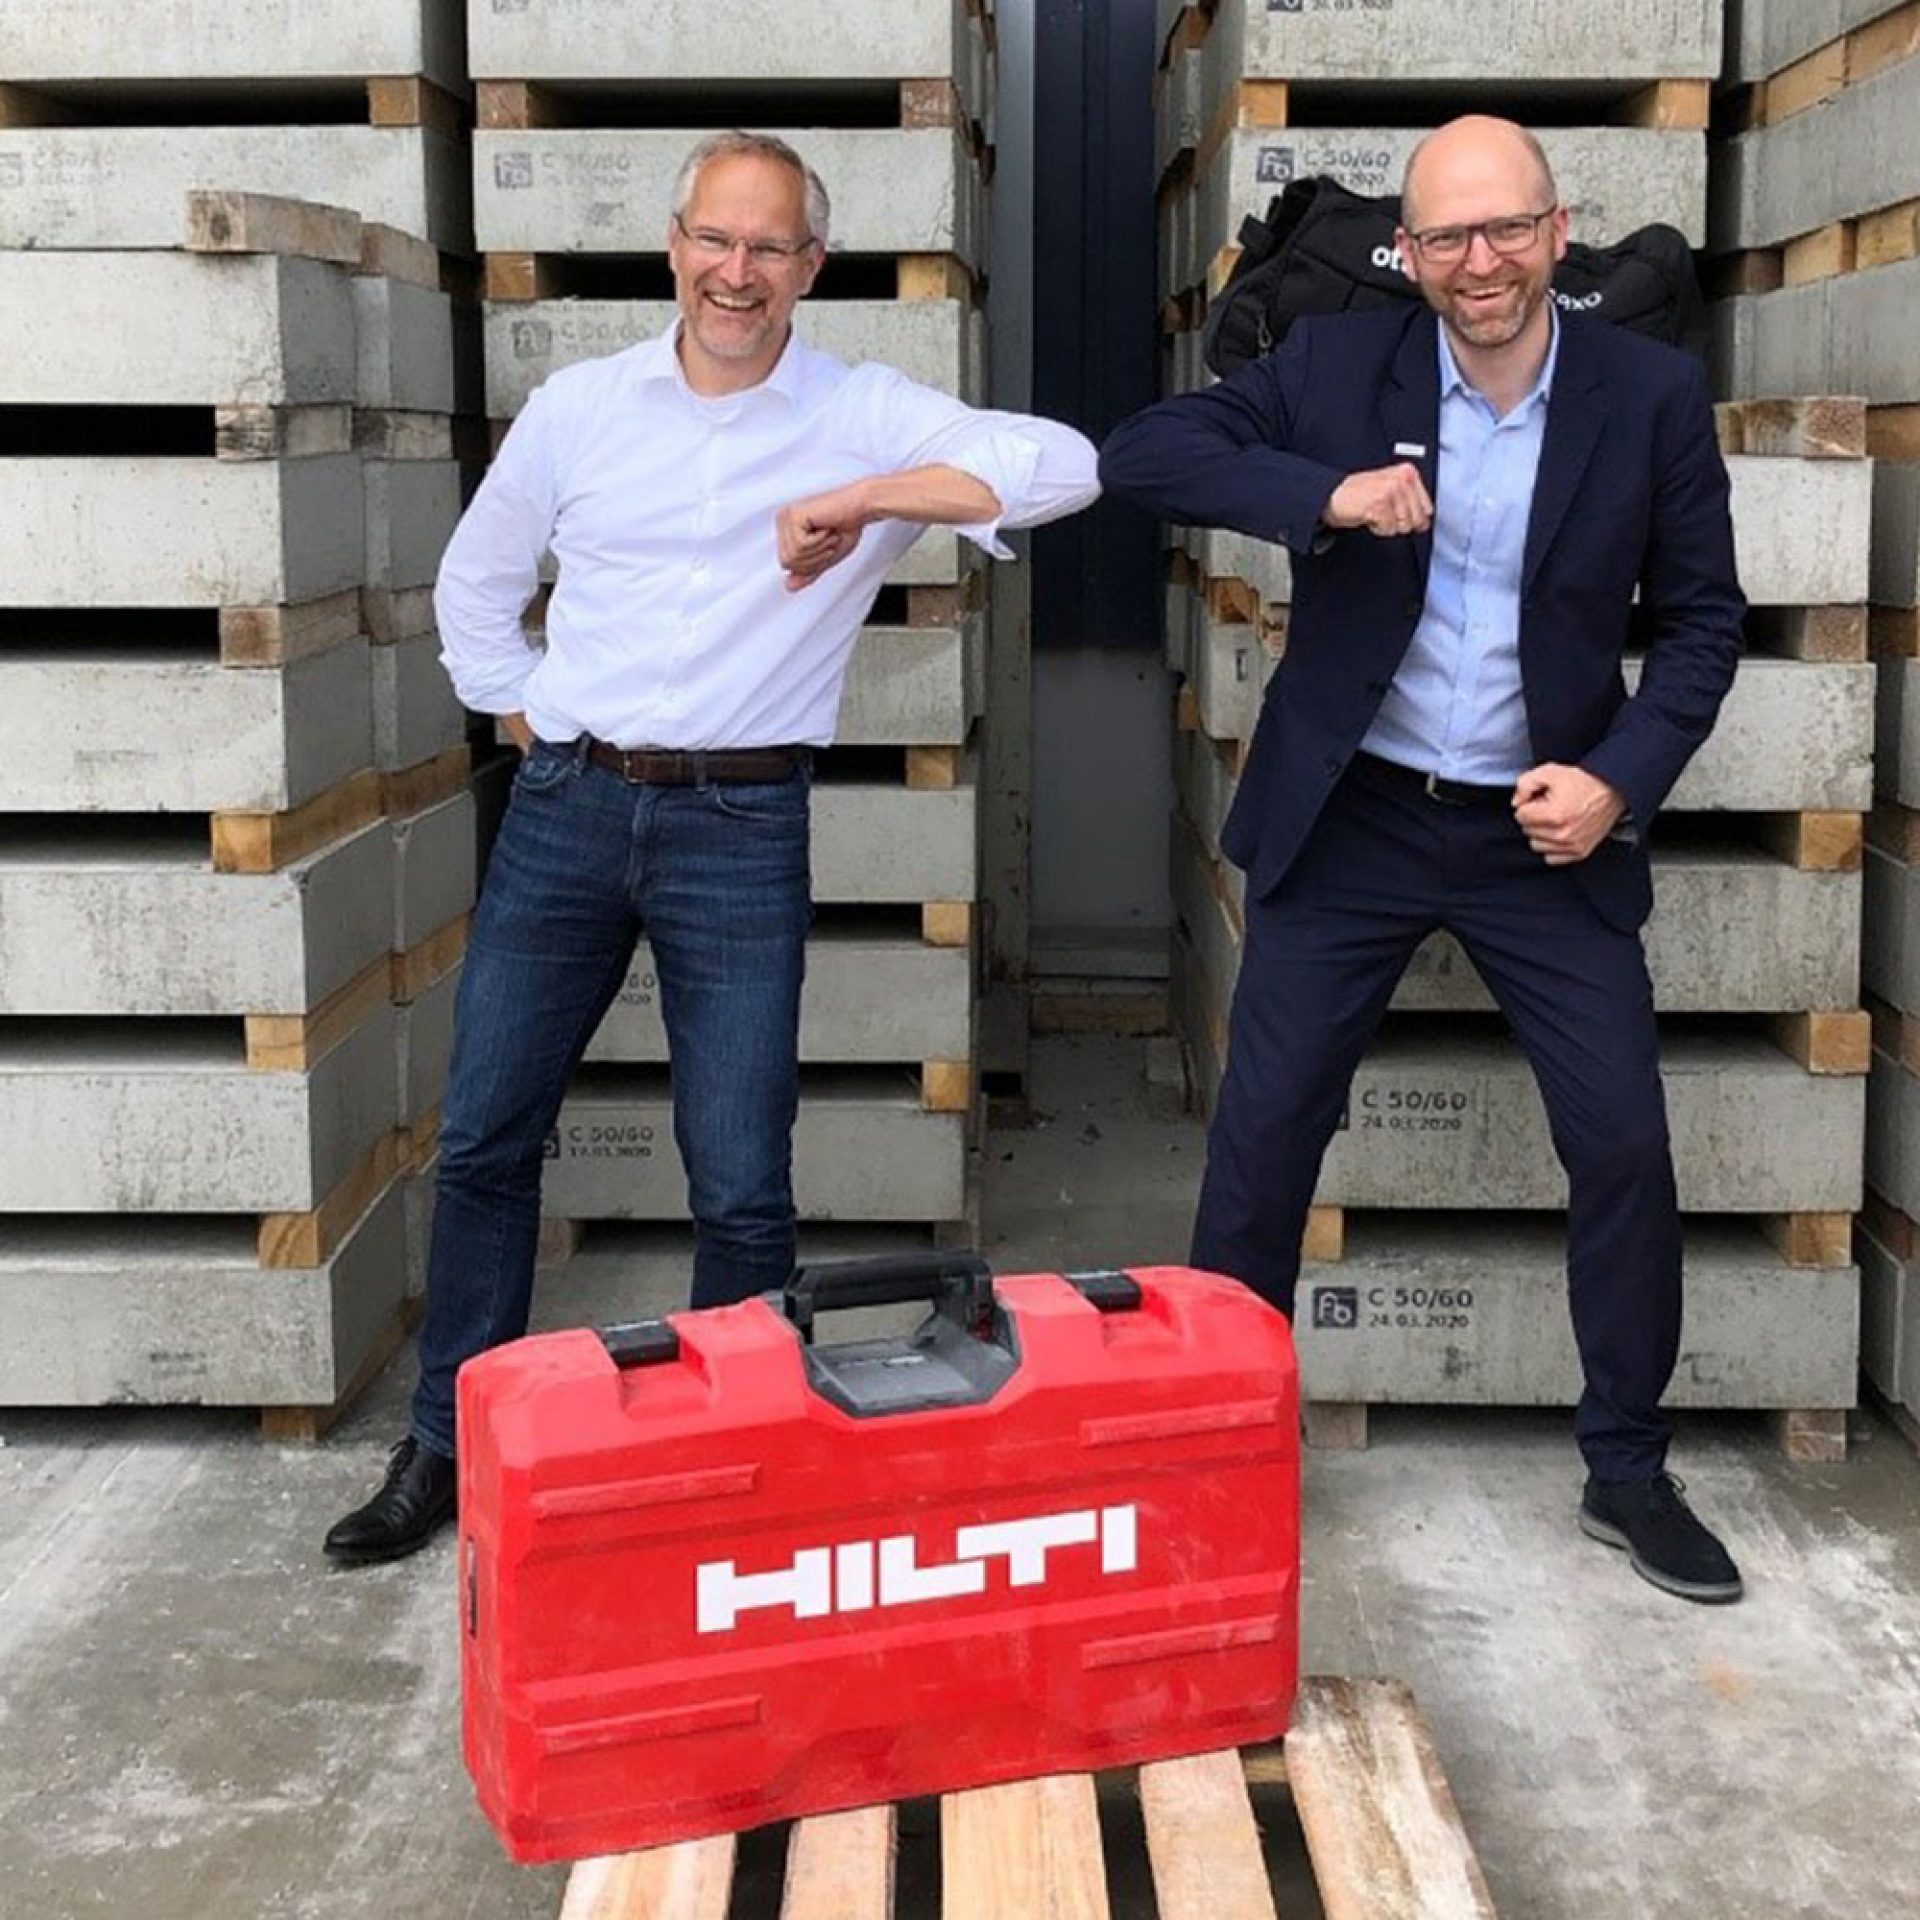 Happy about the new partnership: Johannes Wilfried Huber (left), Head of the Business Unit Diamond Systems at Hilti, and Dr. Sönke Rössing, Head of Ottobock Industrials.